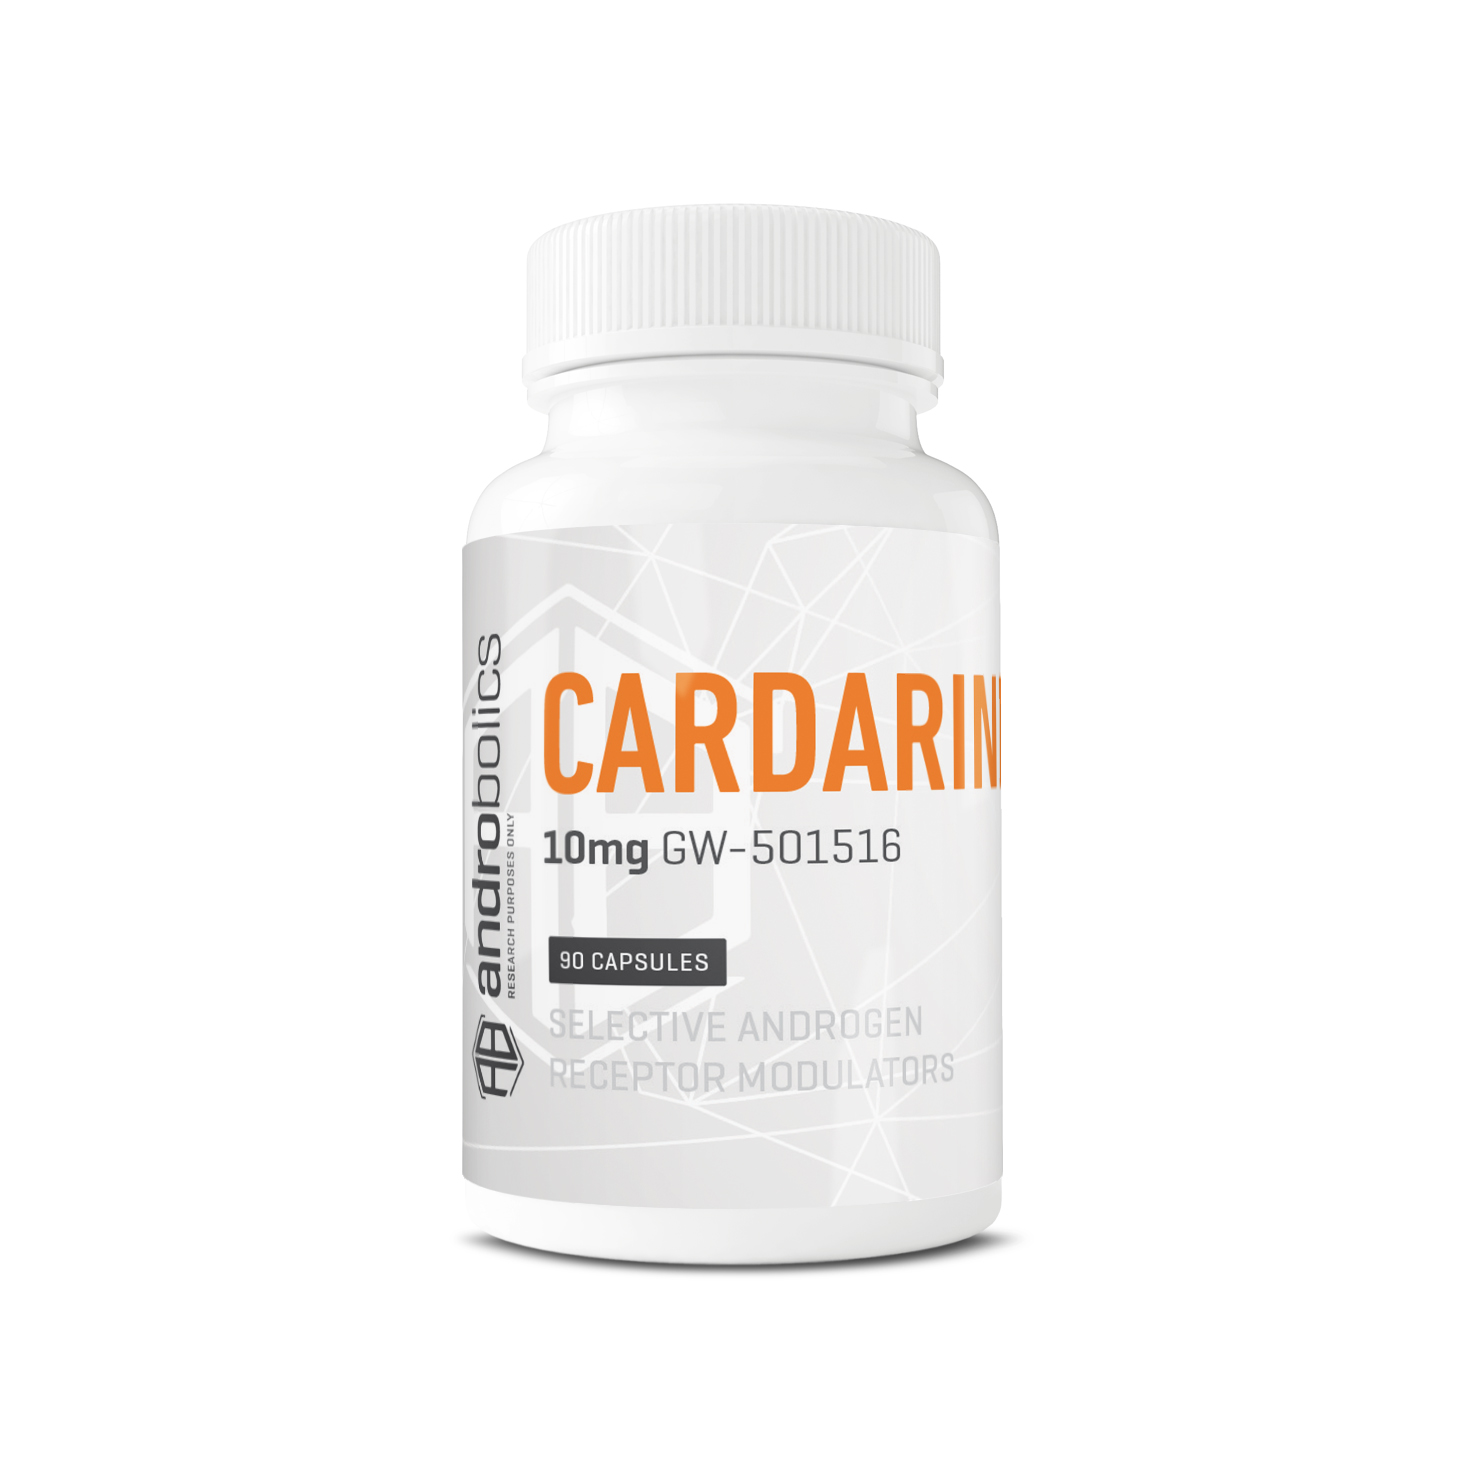 Cardarine Canada - Bottle of Cardarine GW-501516 with 90 capsules of 10mg